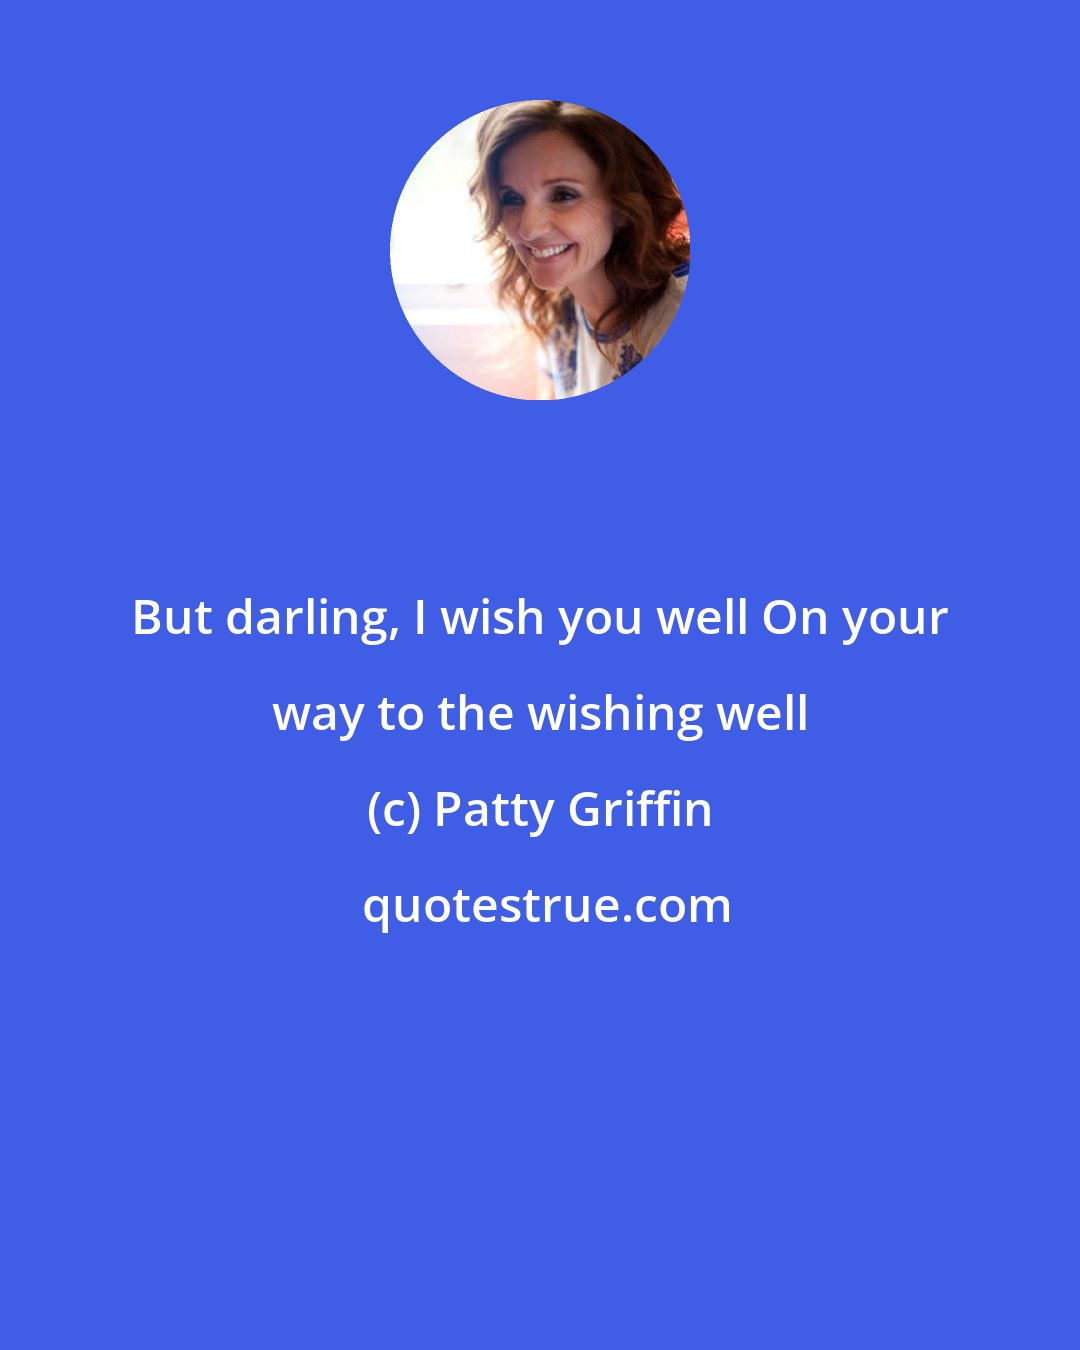 Patty Griffin: But darling, I wish you well On your way to the wishing well